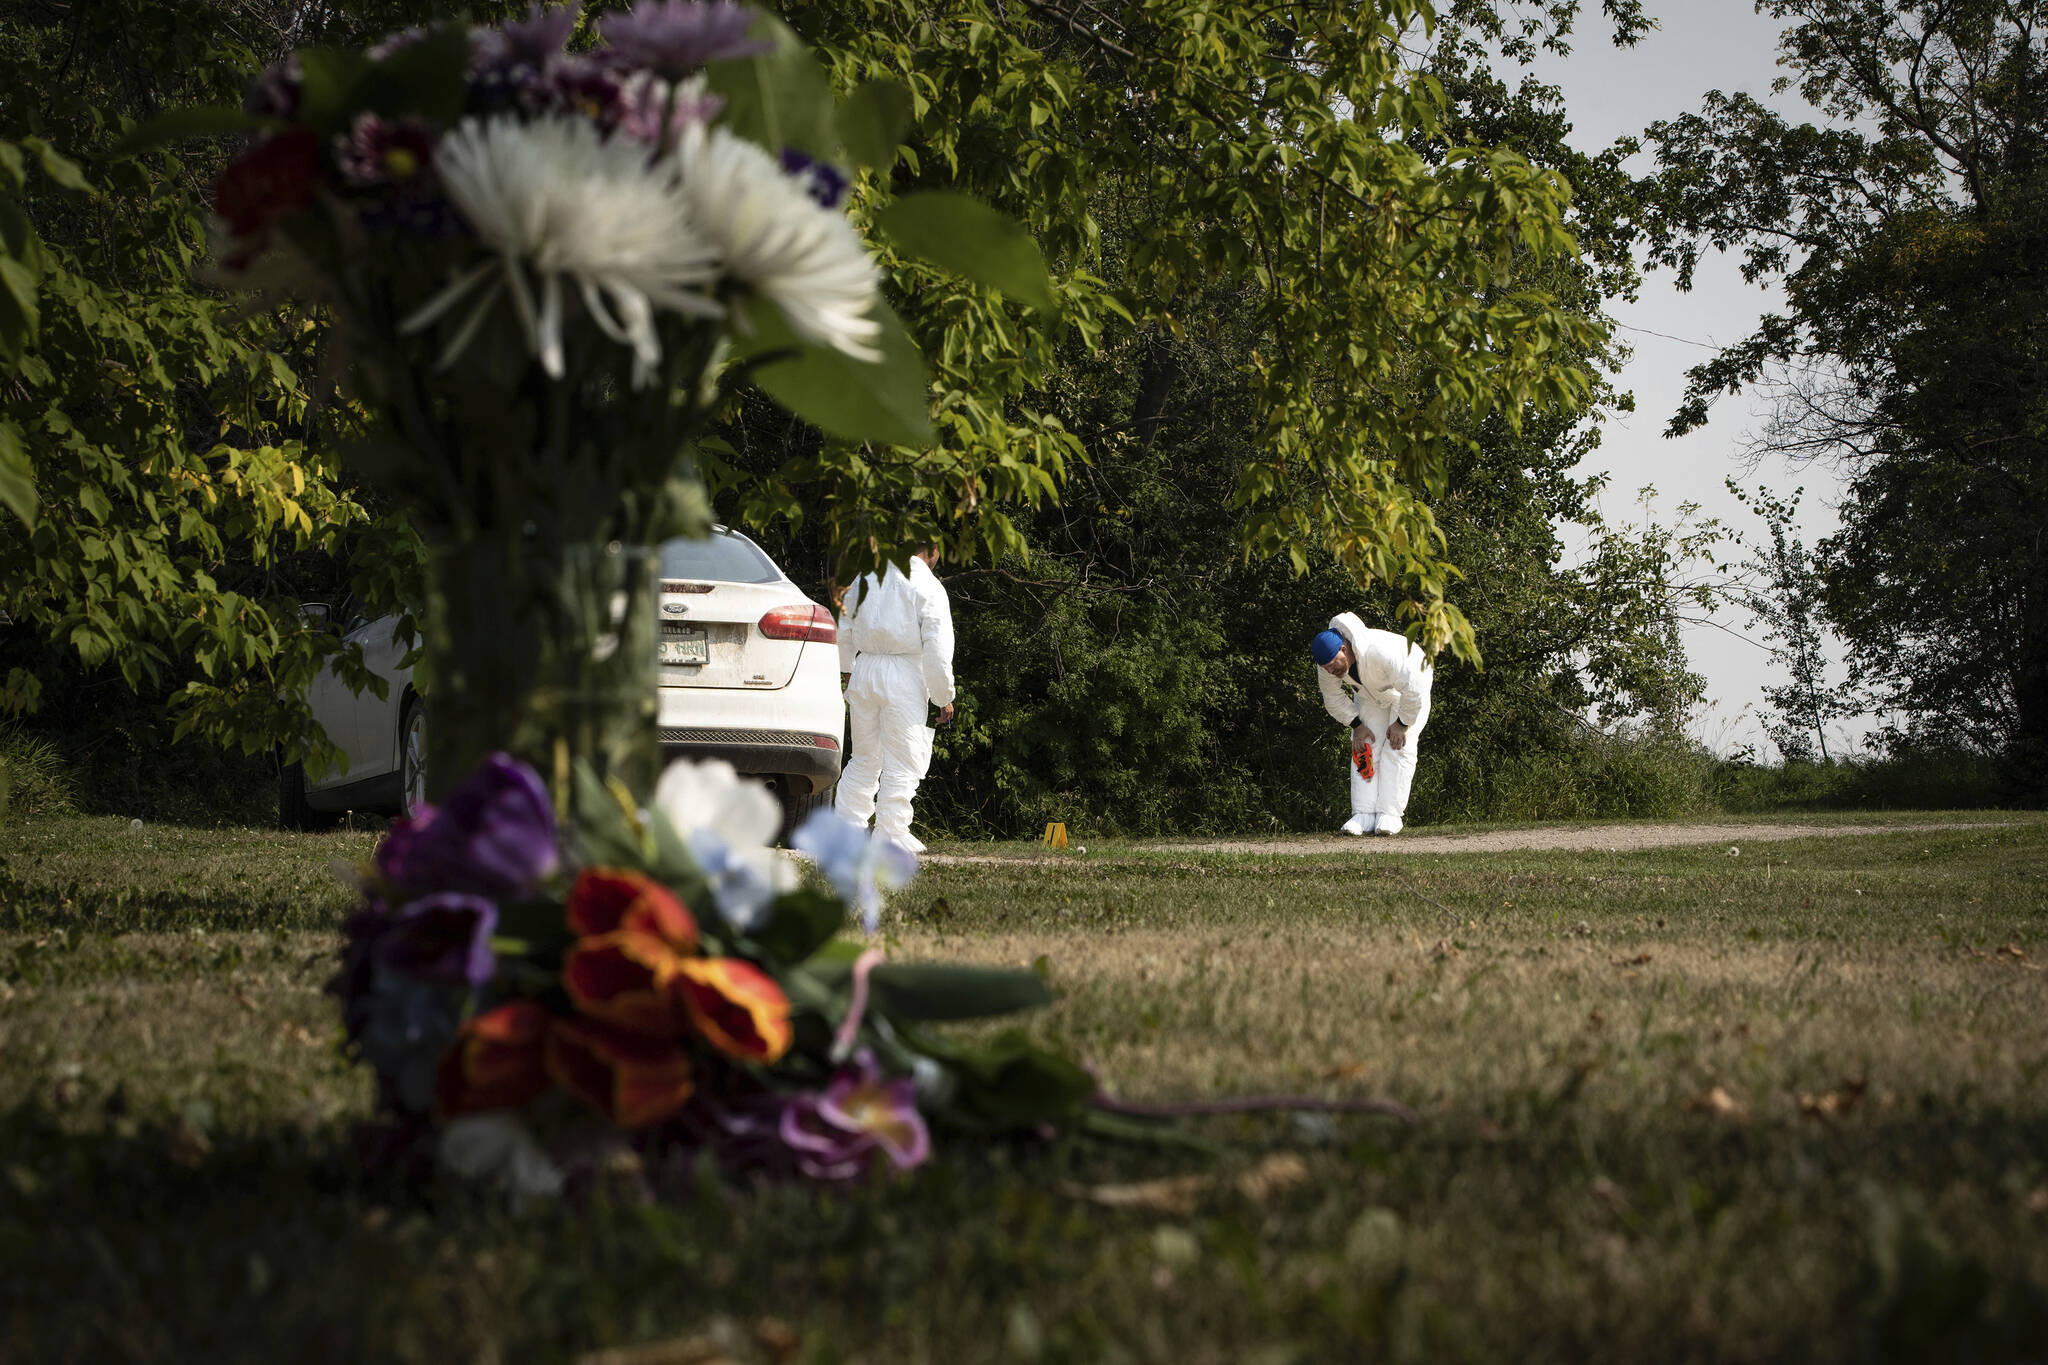 Investigators examine the crime scene near a memorial of flowers outside the home of Wes Petterson in Weldon, Saskatchewan, Monday, Sept. 5, 2022. Petterson, 77, was killed in a series of stabbings in the area on Sunday. (AP Photo/Robert Bumsted)